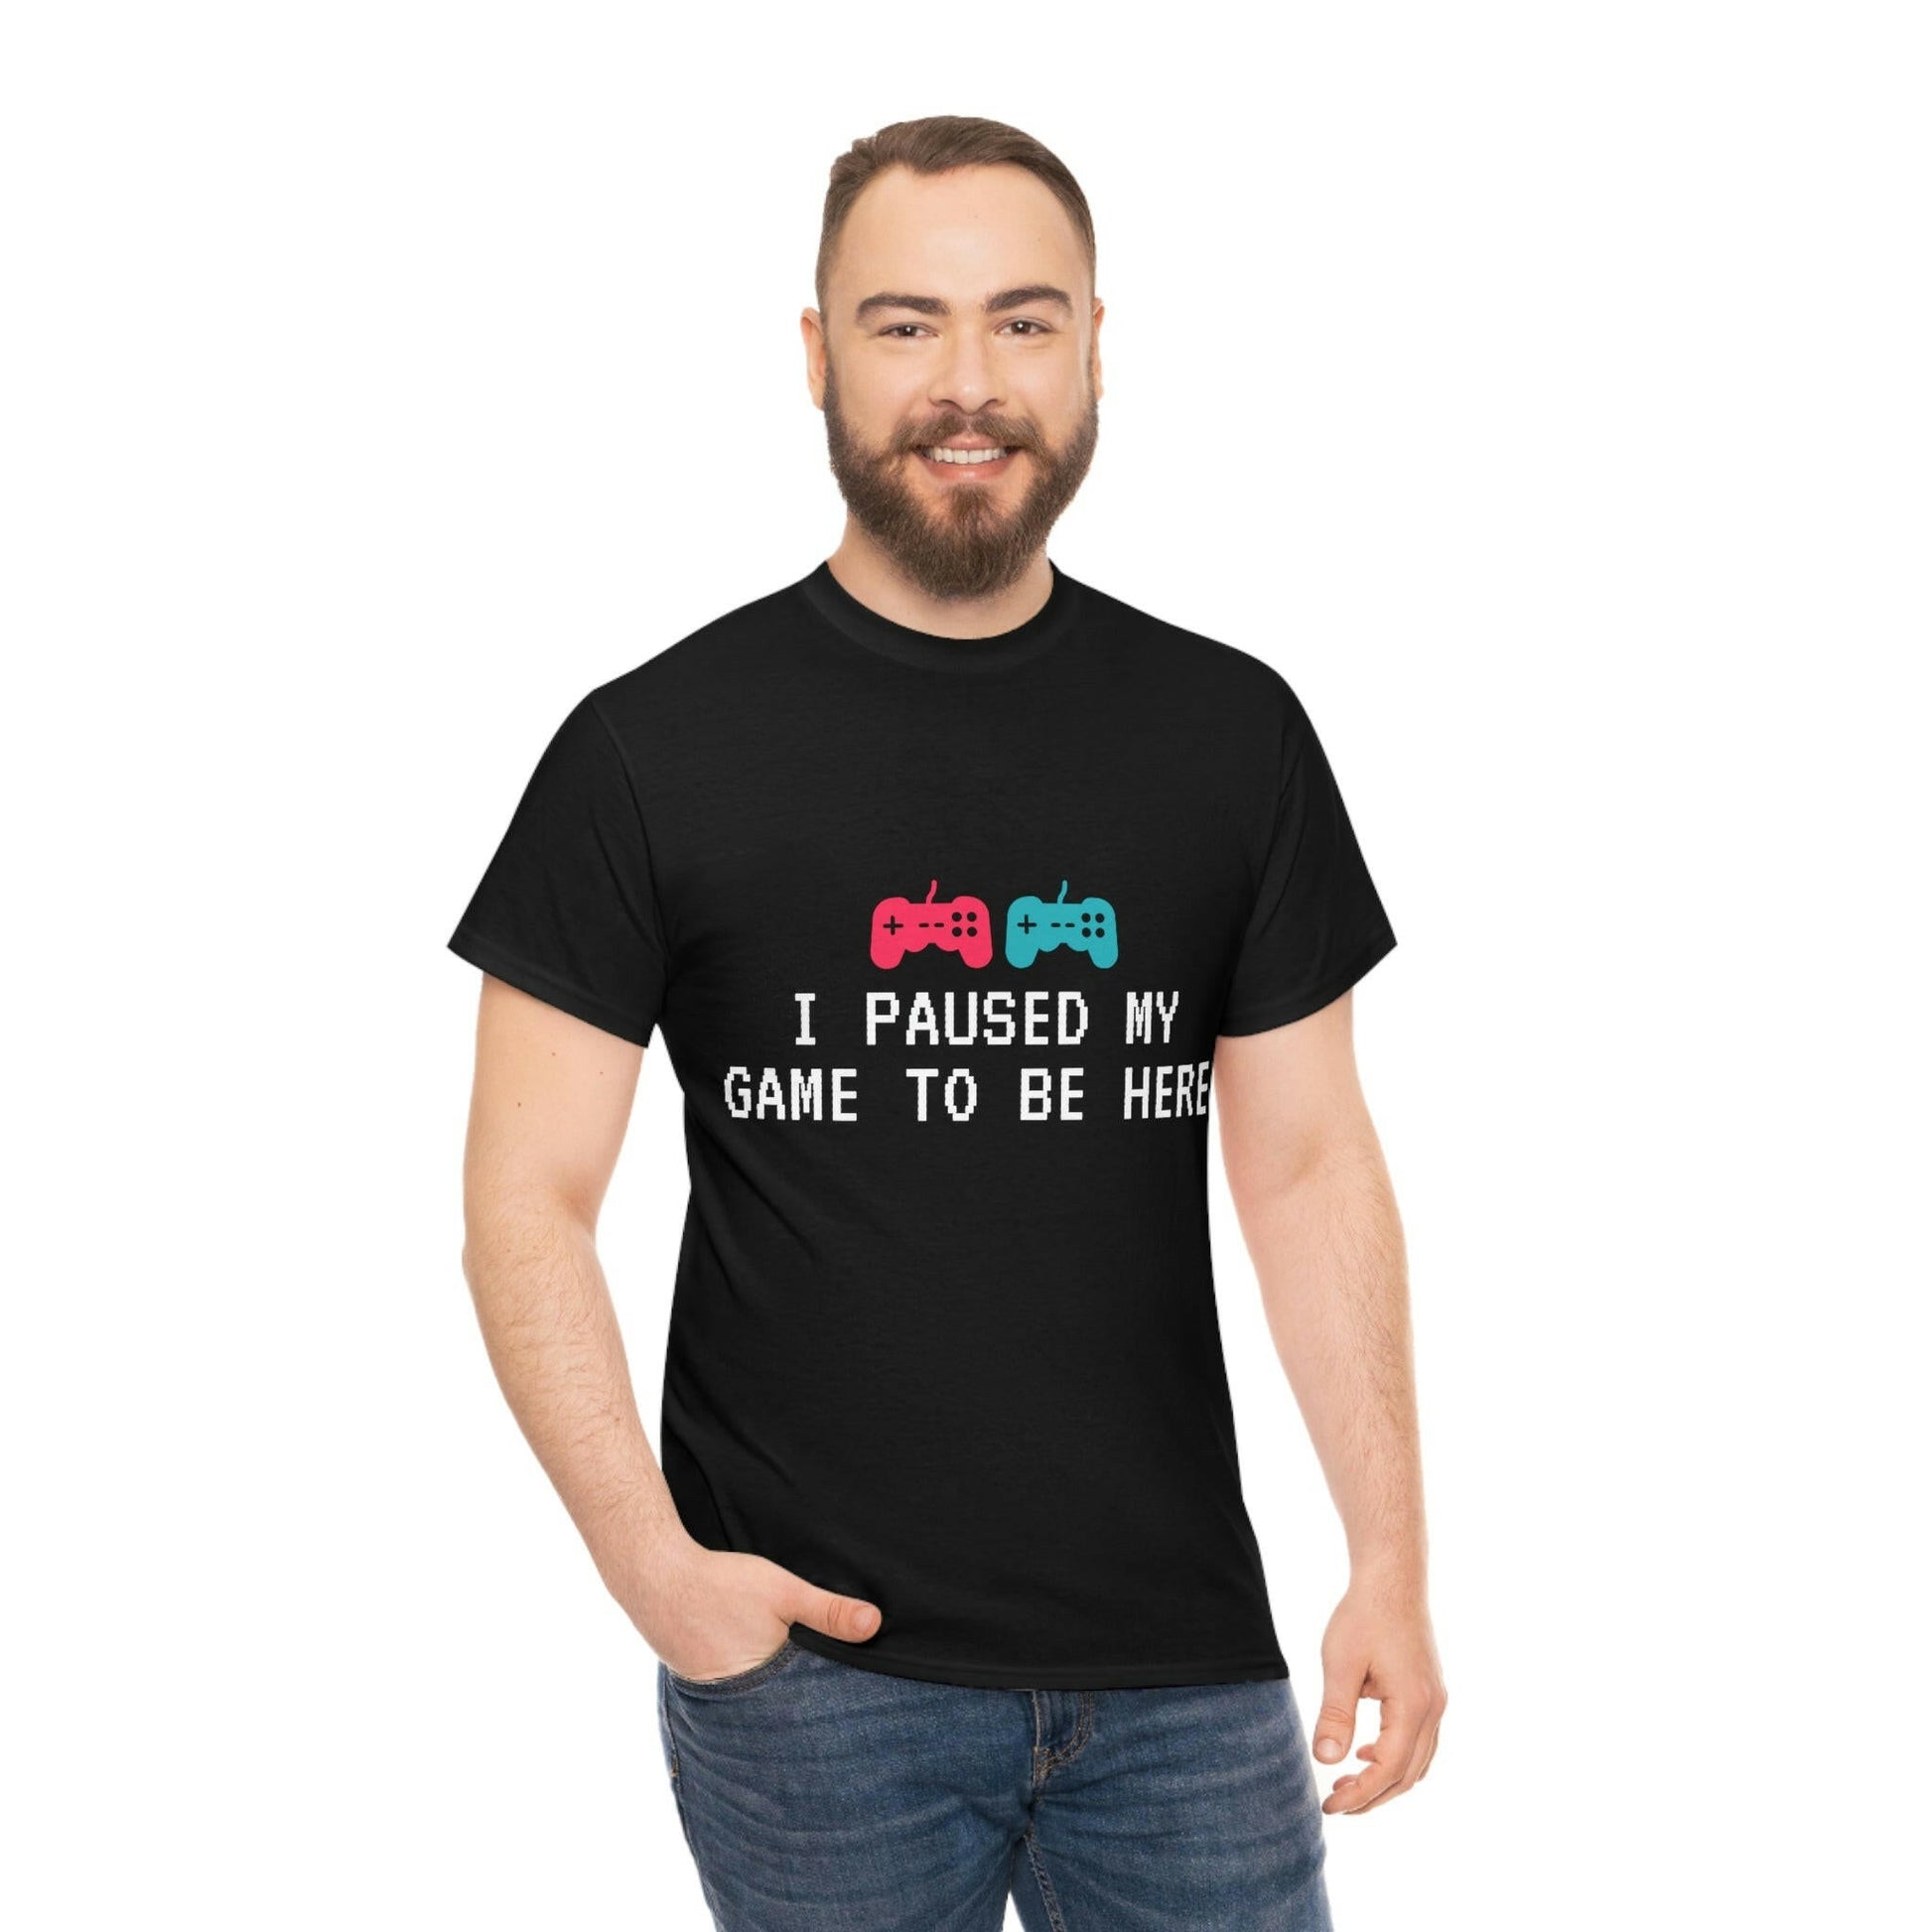 I Paused My Game to Be Here T-Shirt - RetroTeeShop